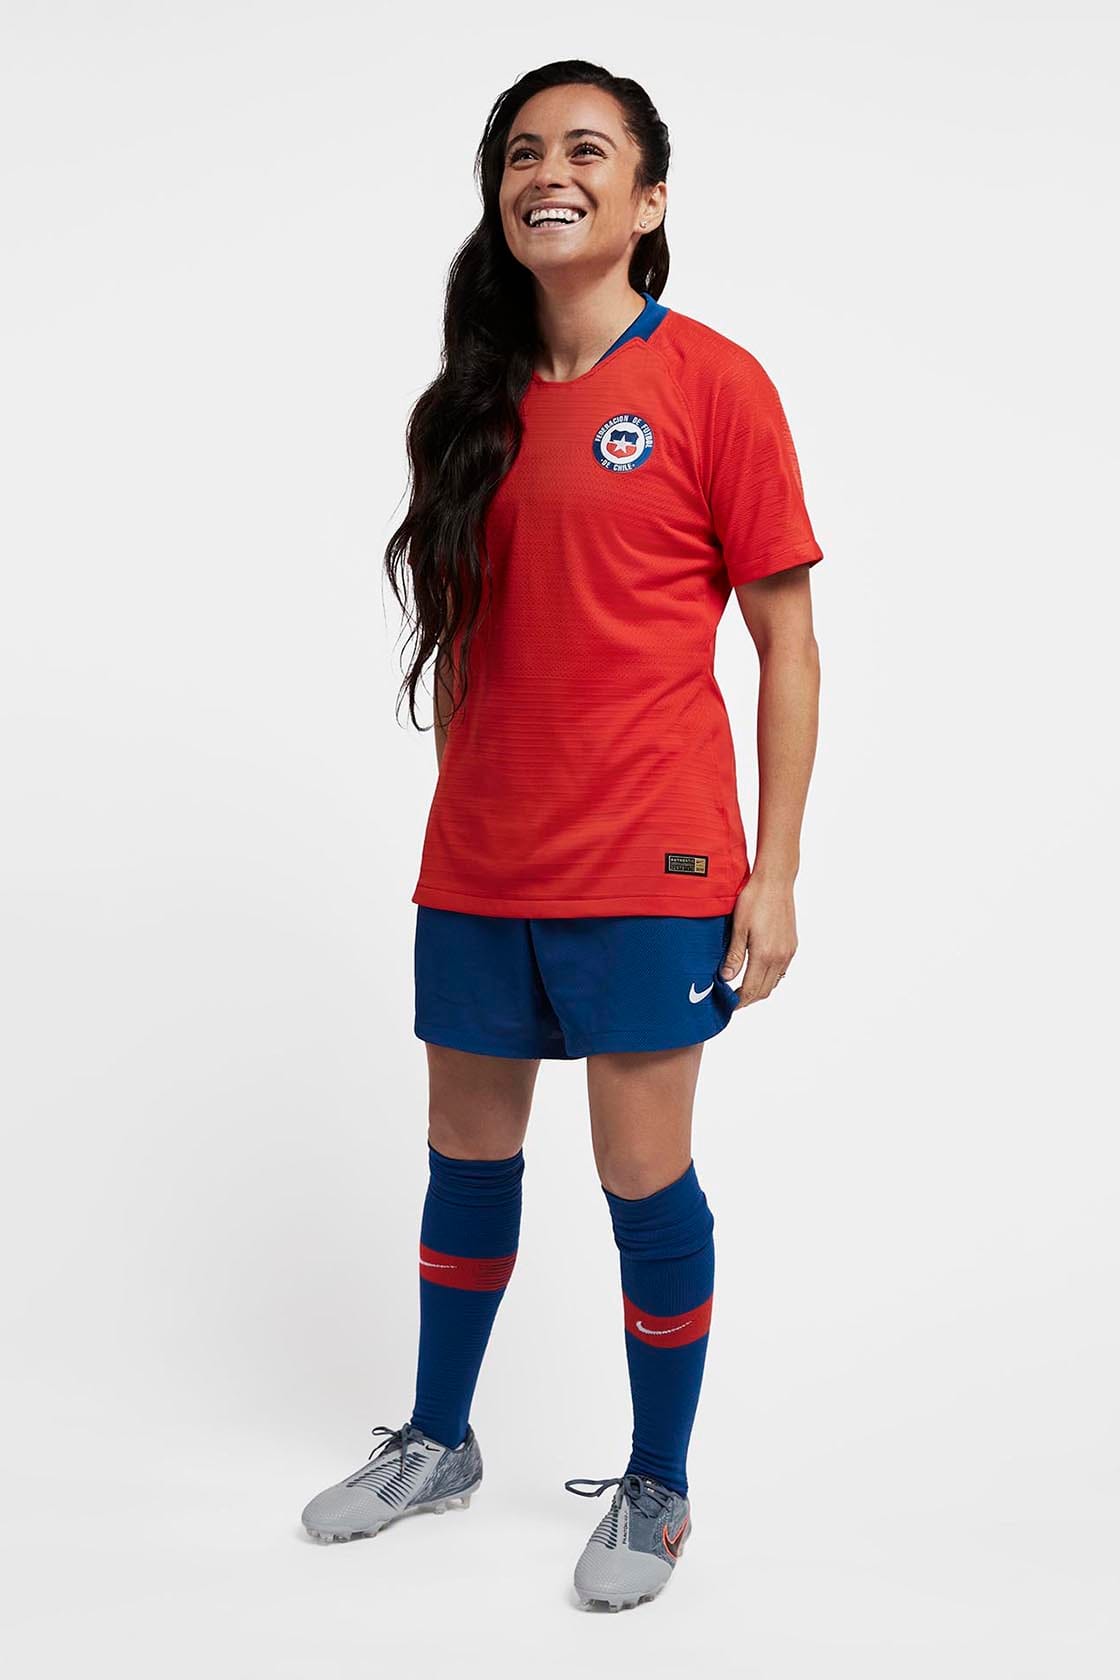 canada women's world cup jersey